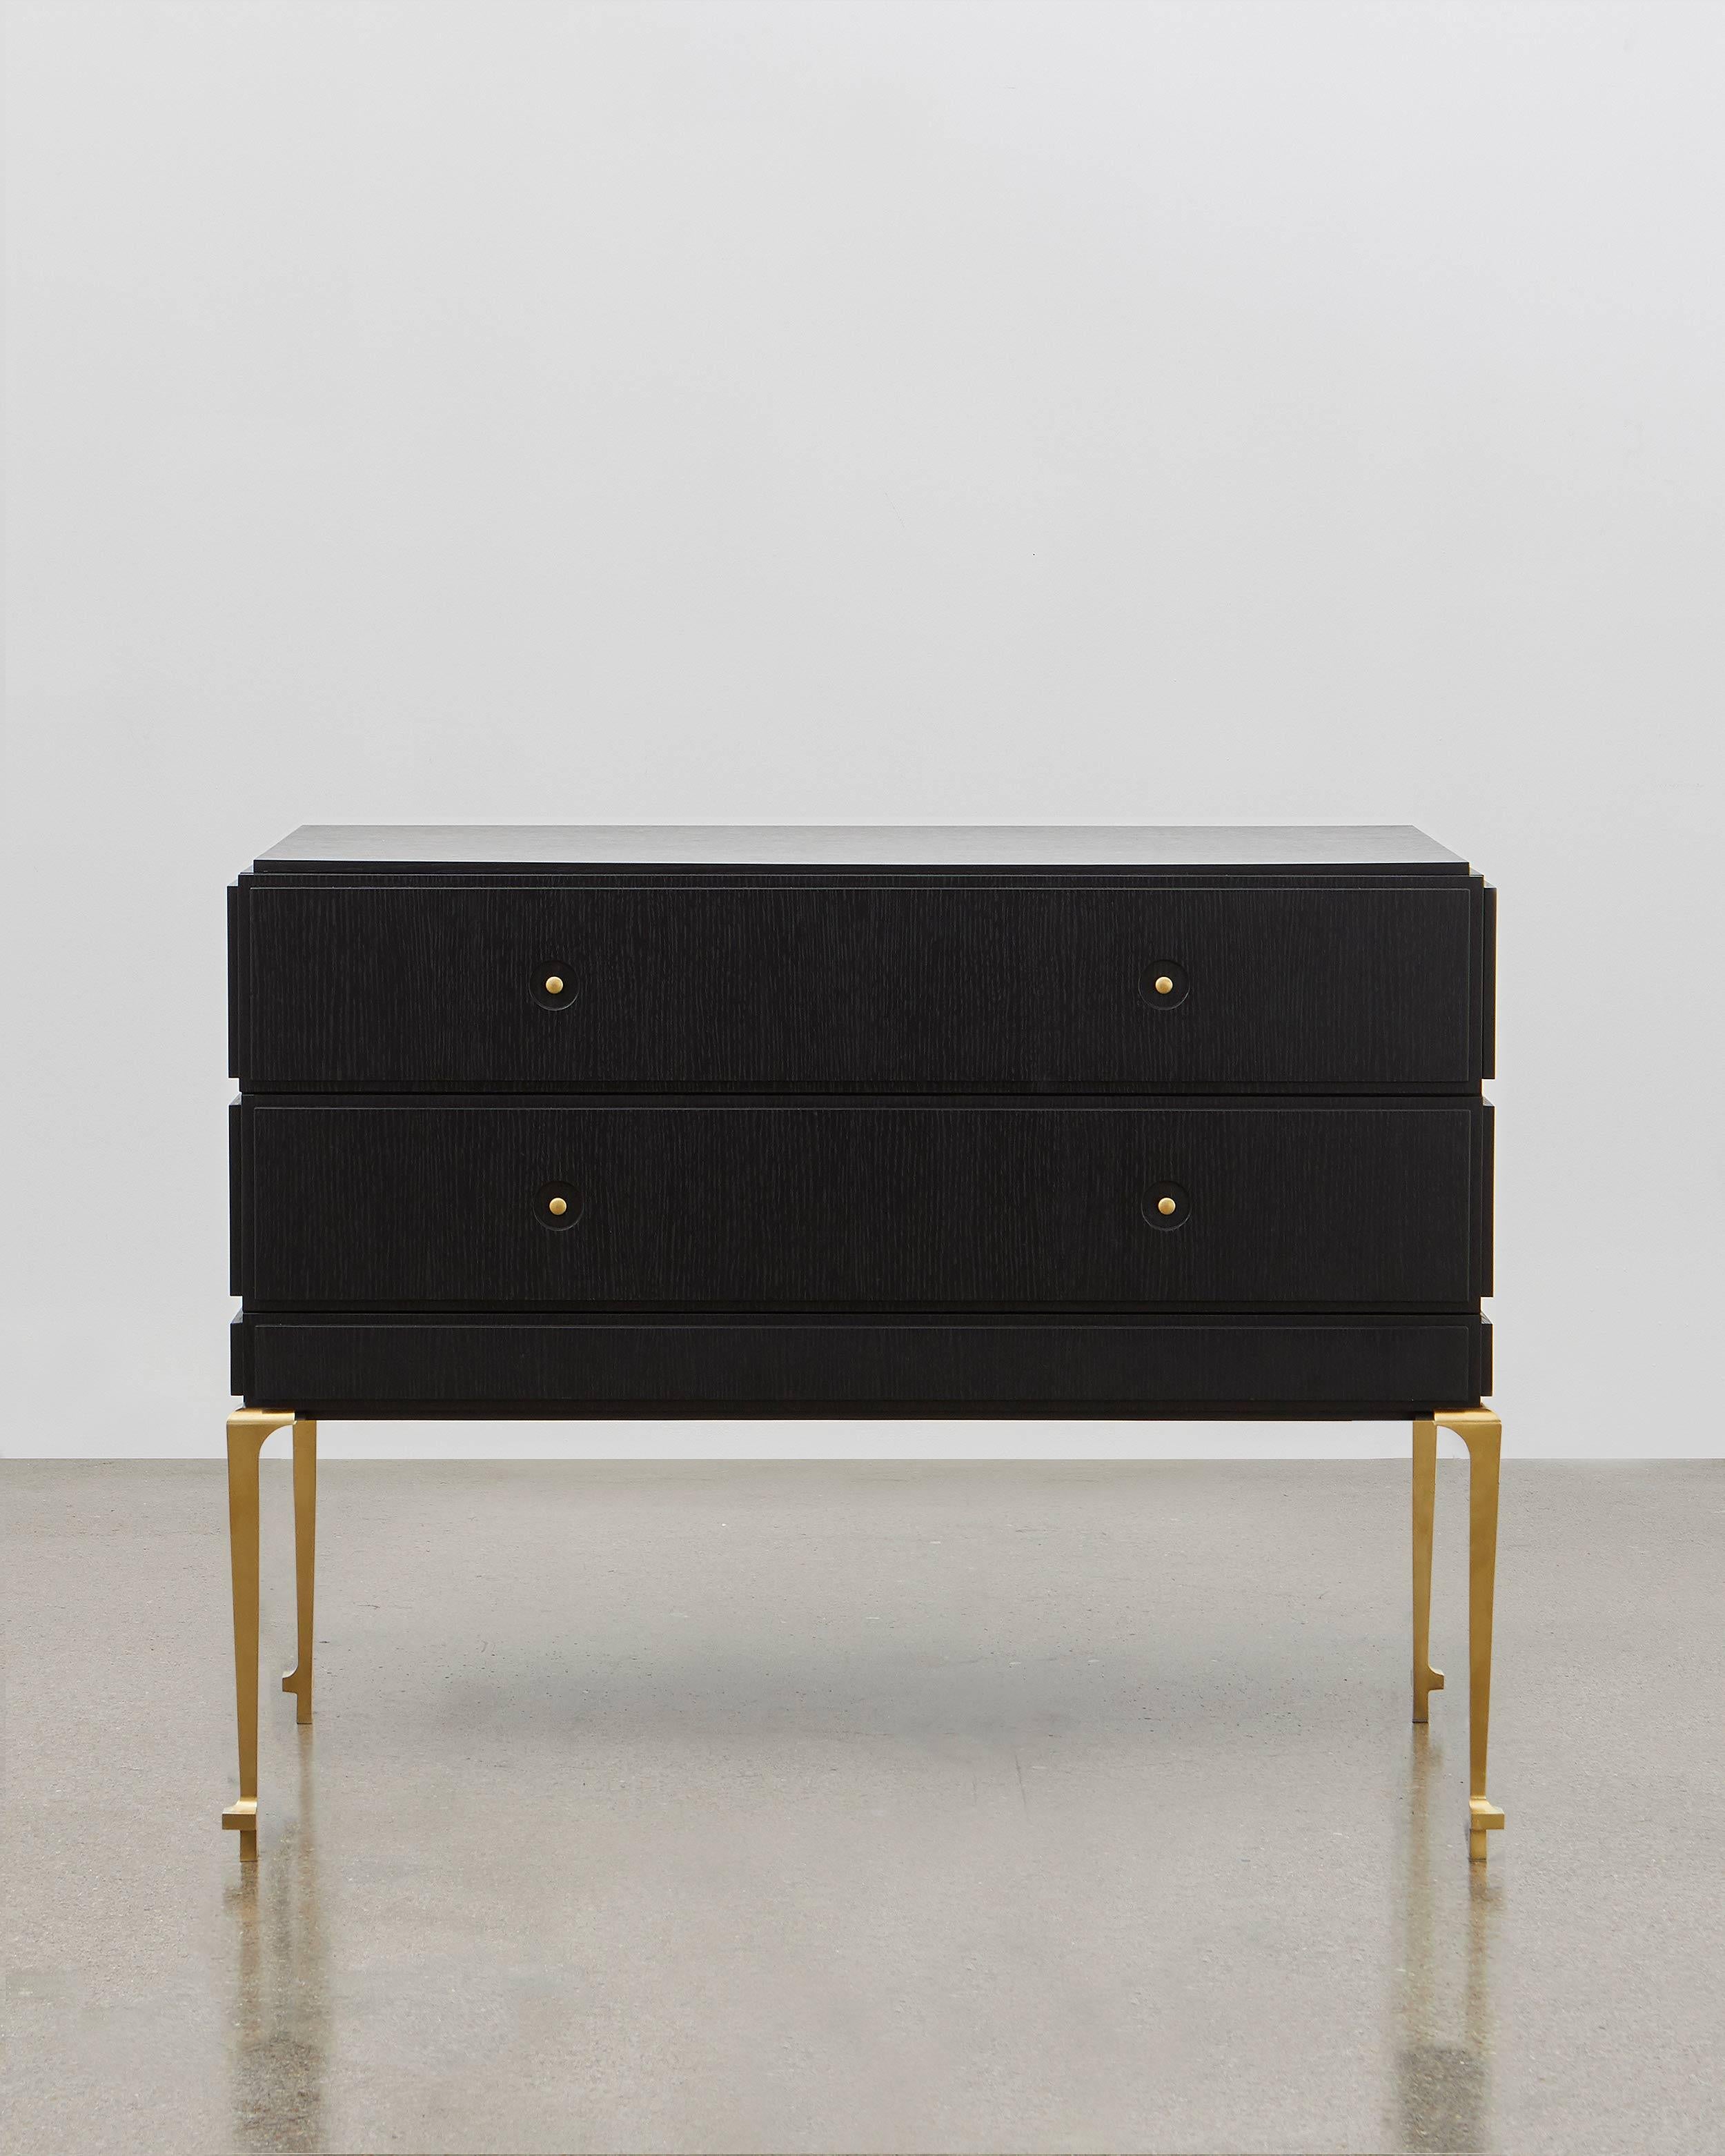 Created so it can be placed in the centre of a room, away from a wall, Poul Henningsen’s grand chest of drawers features wooden panels on all sides. It is designed to be admired and considered from every angle.

This piece highlights the